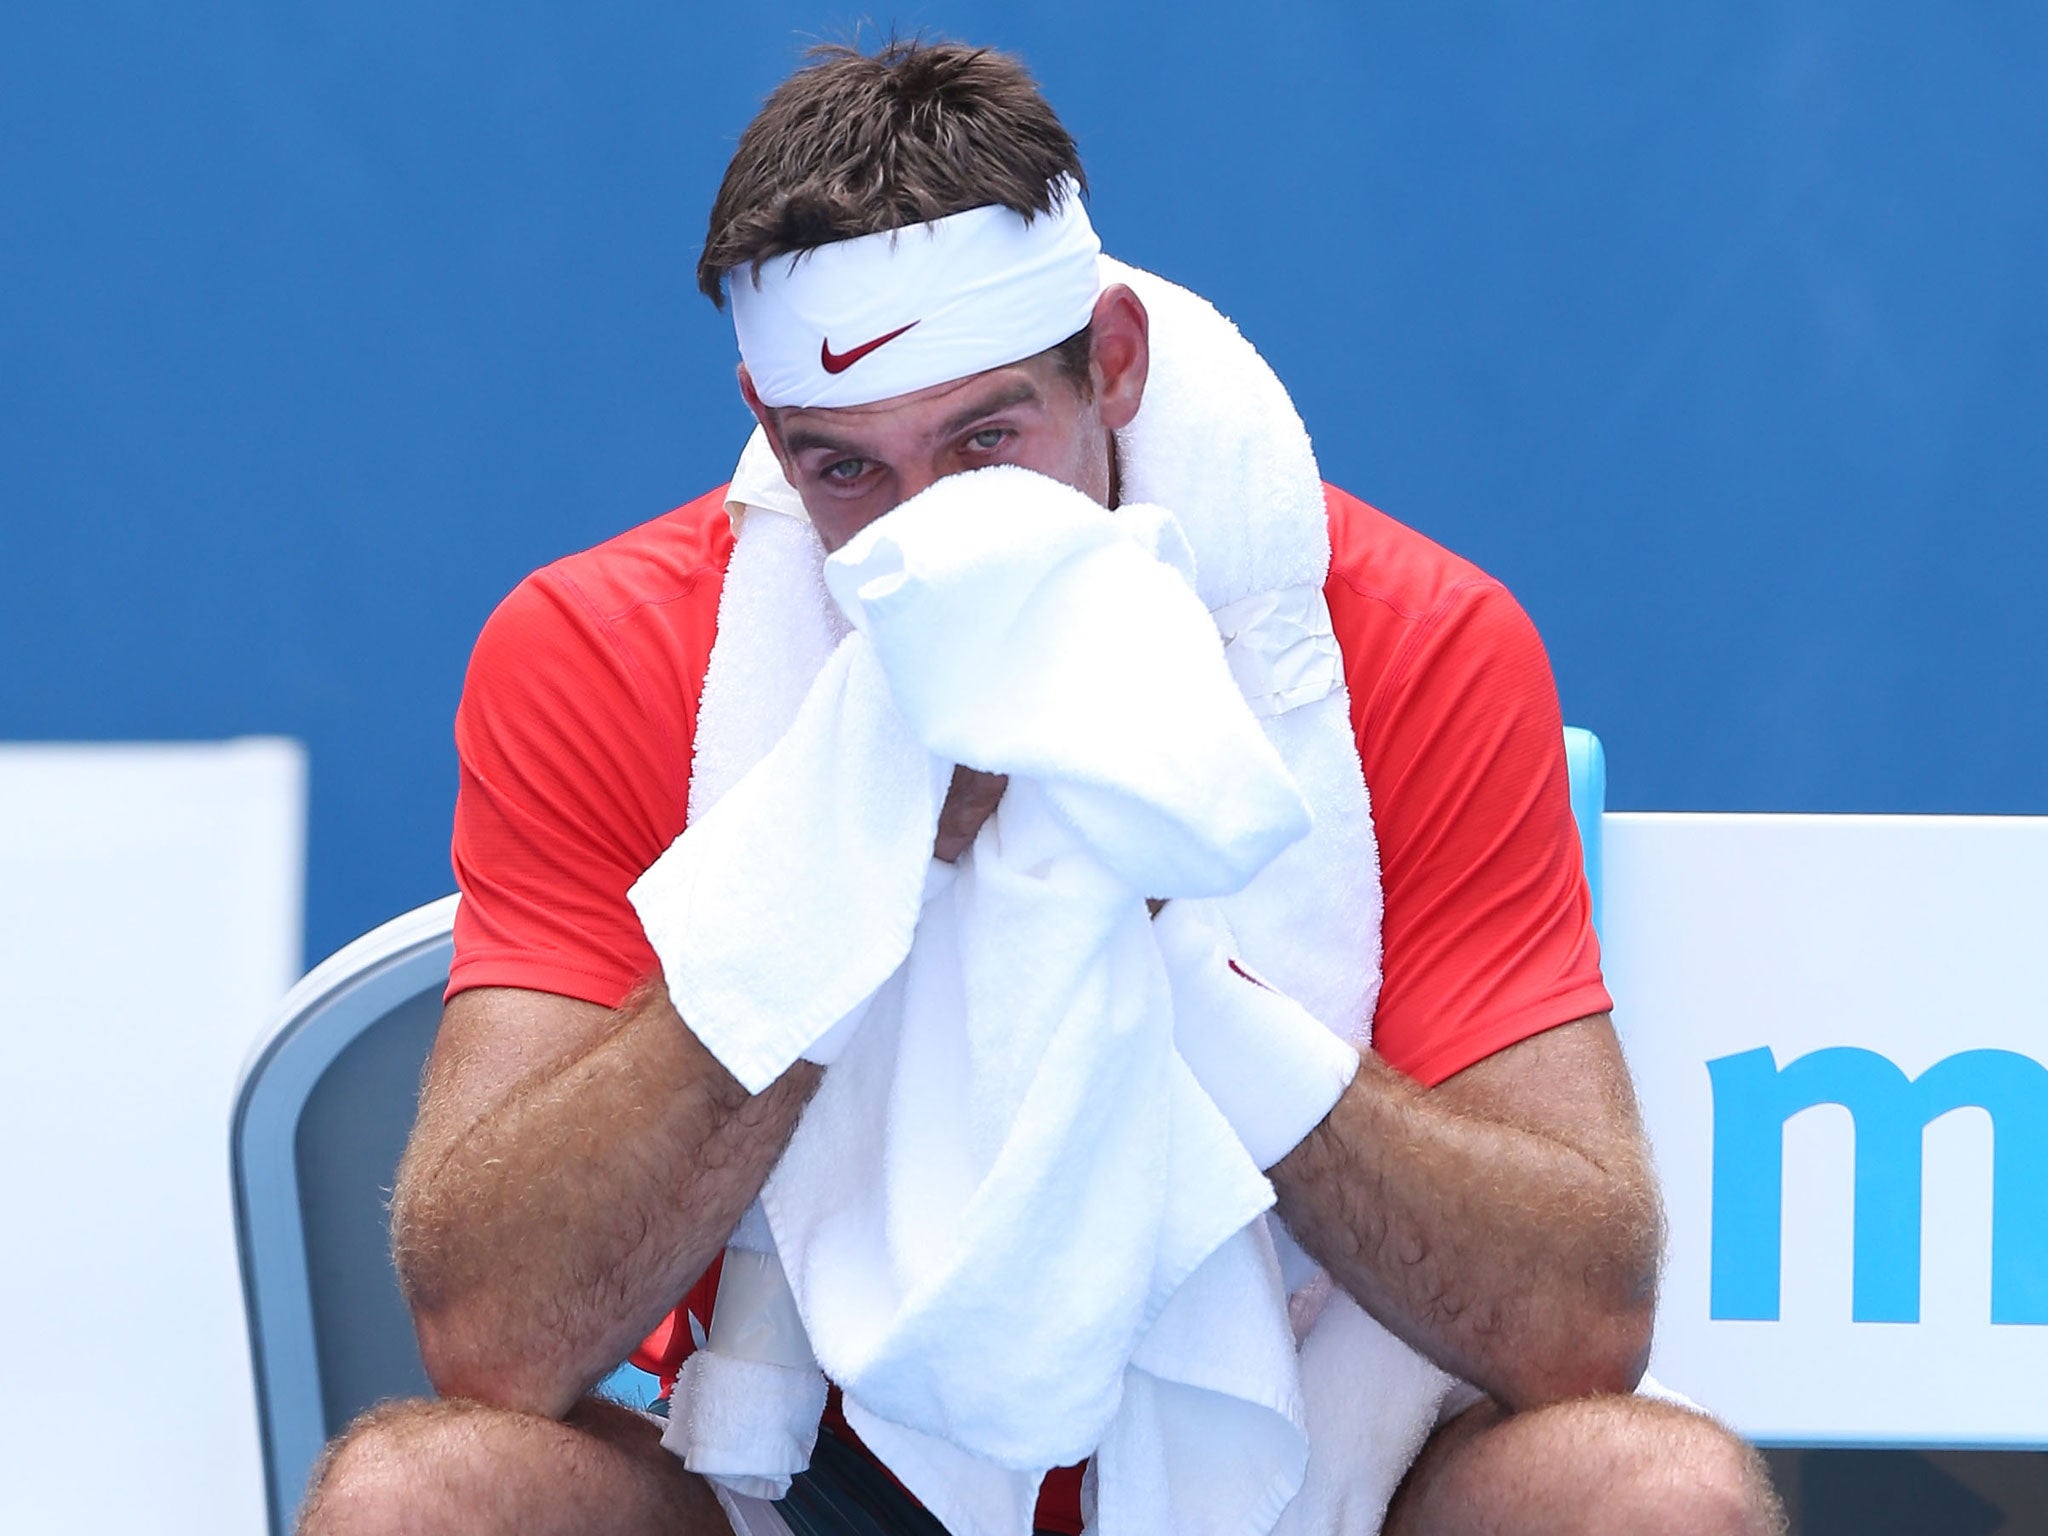 Juan Martin Del Potro was beating in the second round of the Australian Open by Roberto Bautista